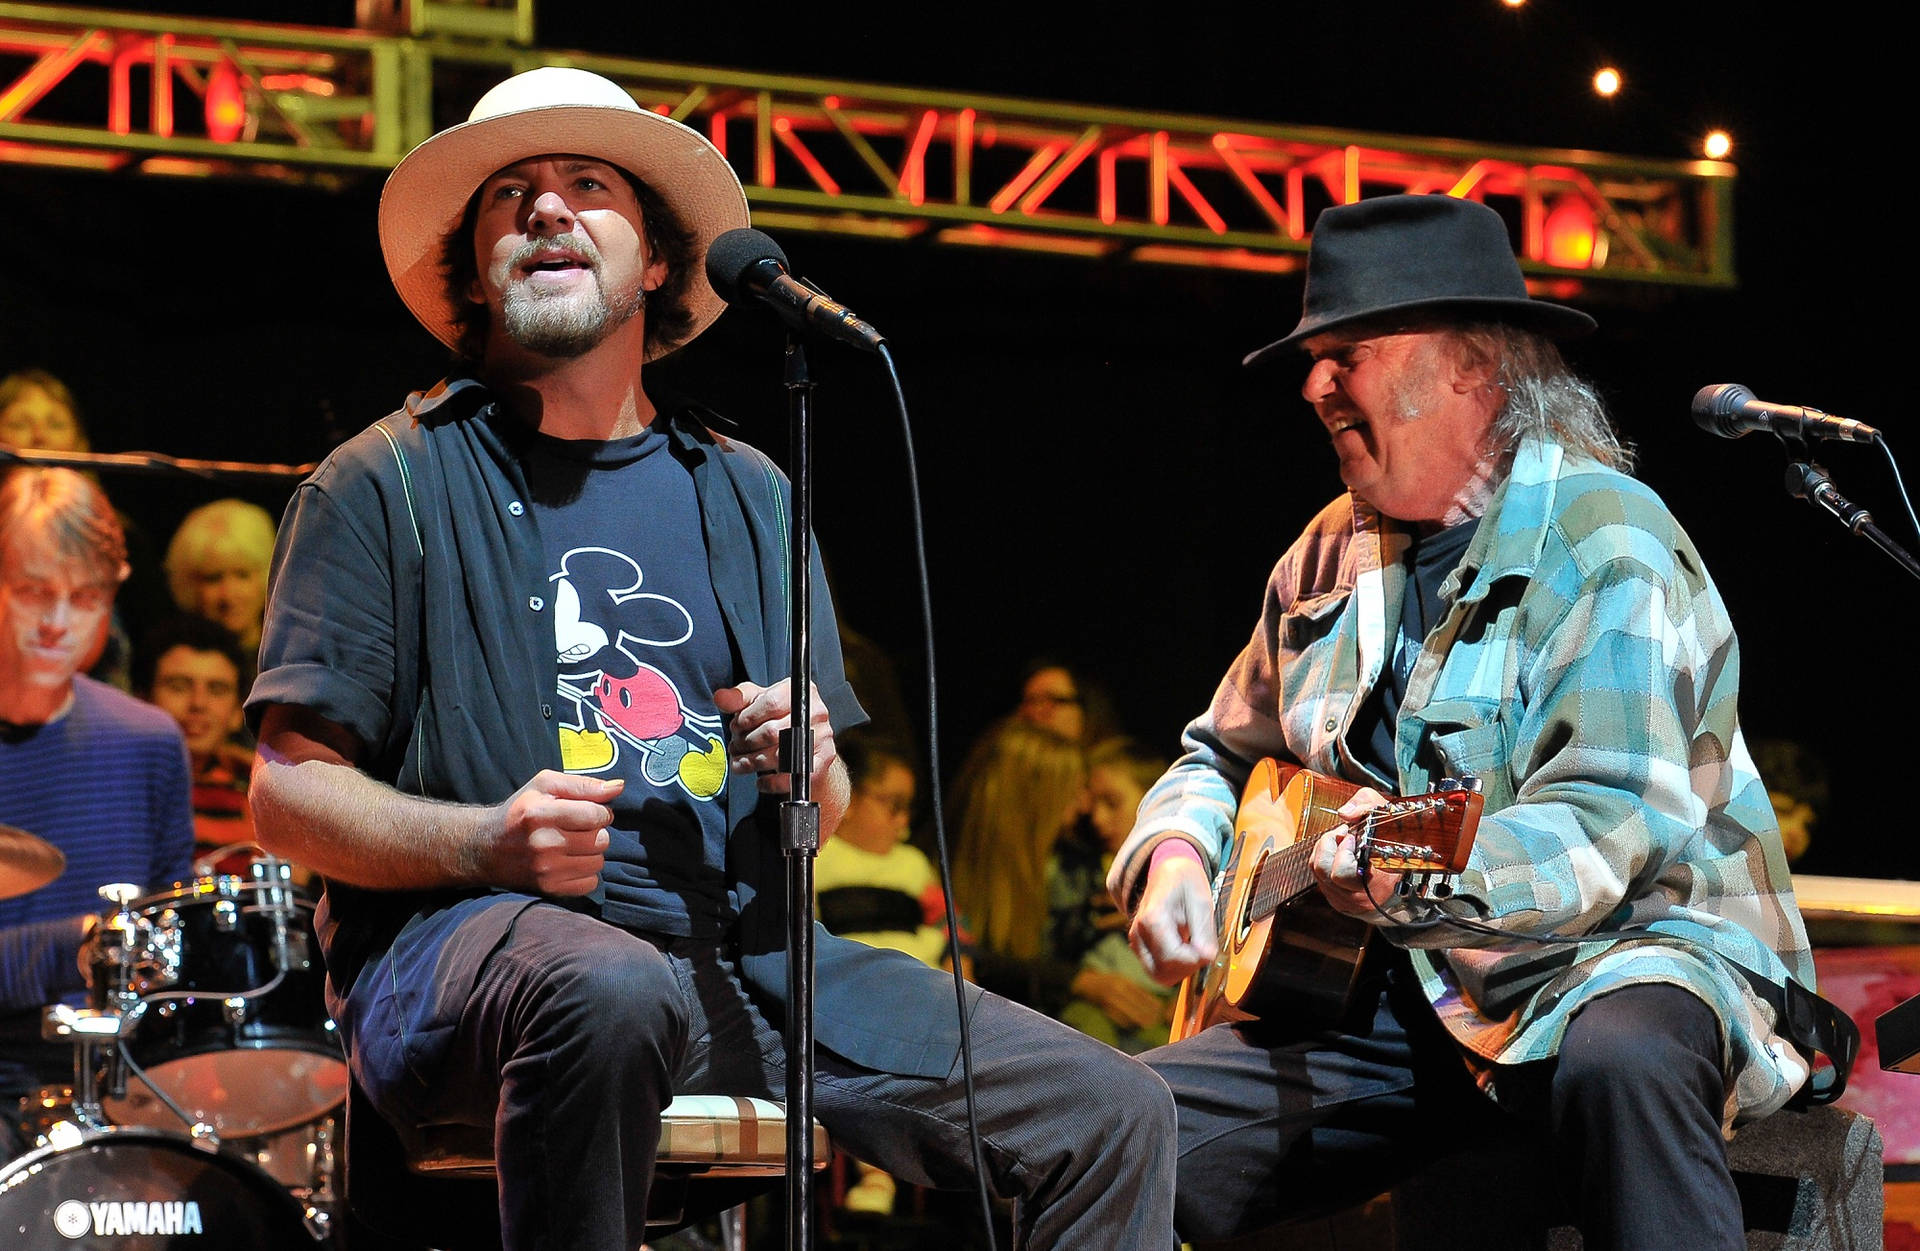 Classic Rock Icons - Eddie Vedder And Neil Young Performing With Pearl Jam Background